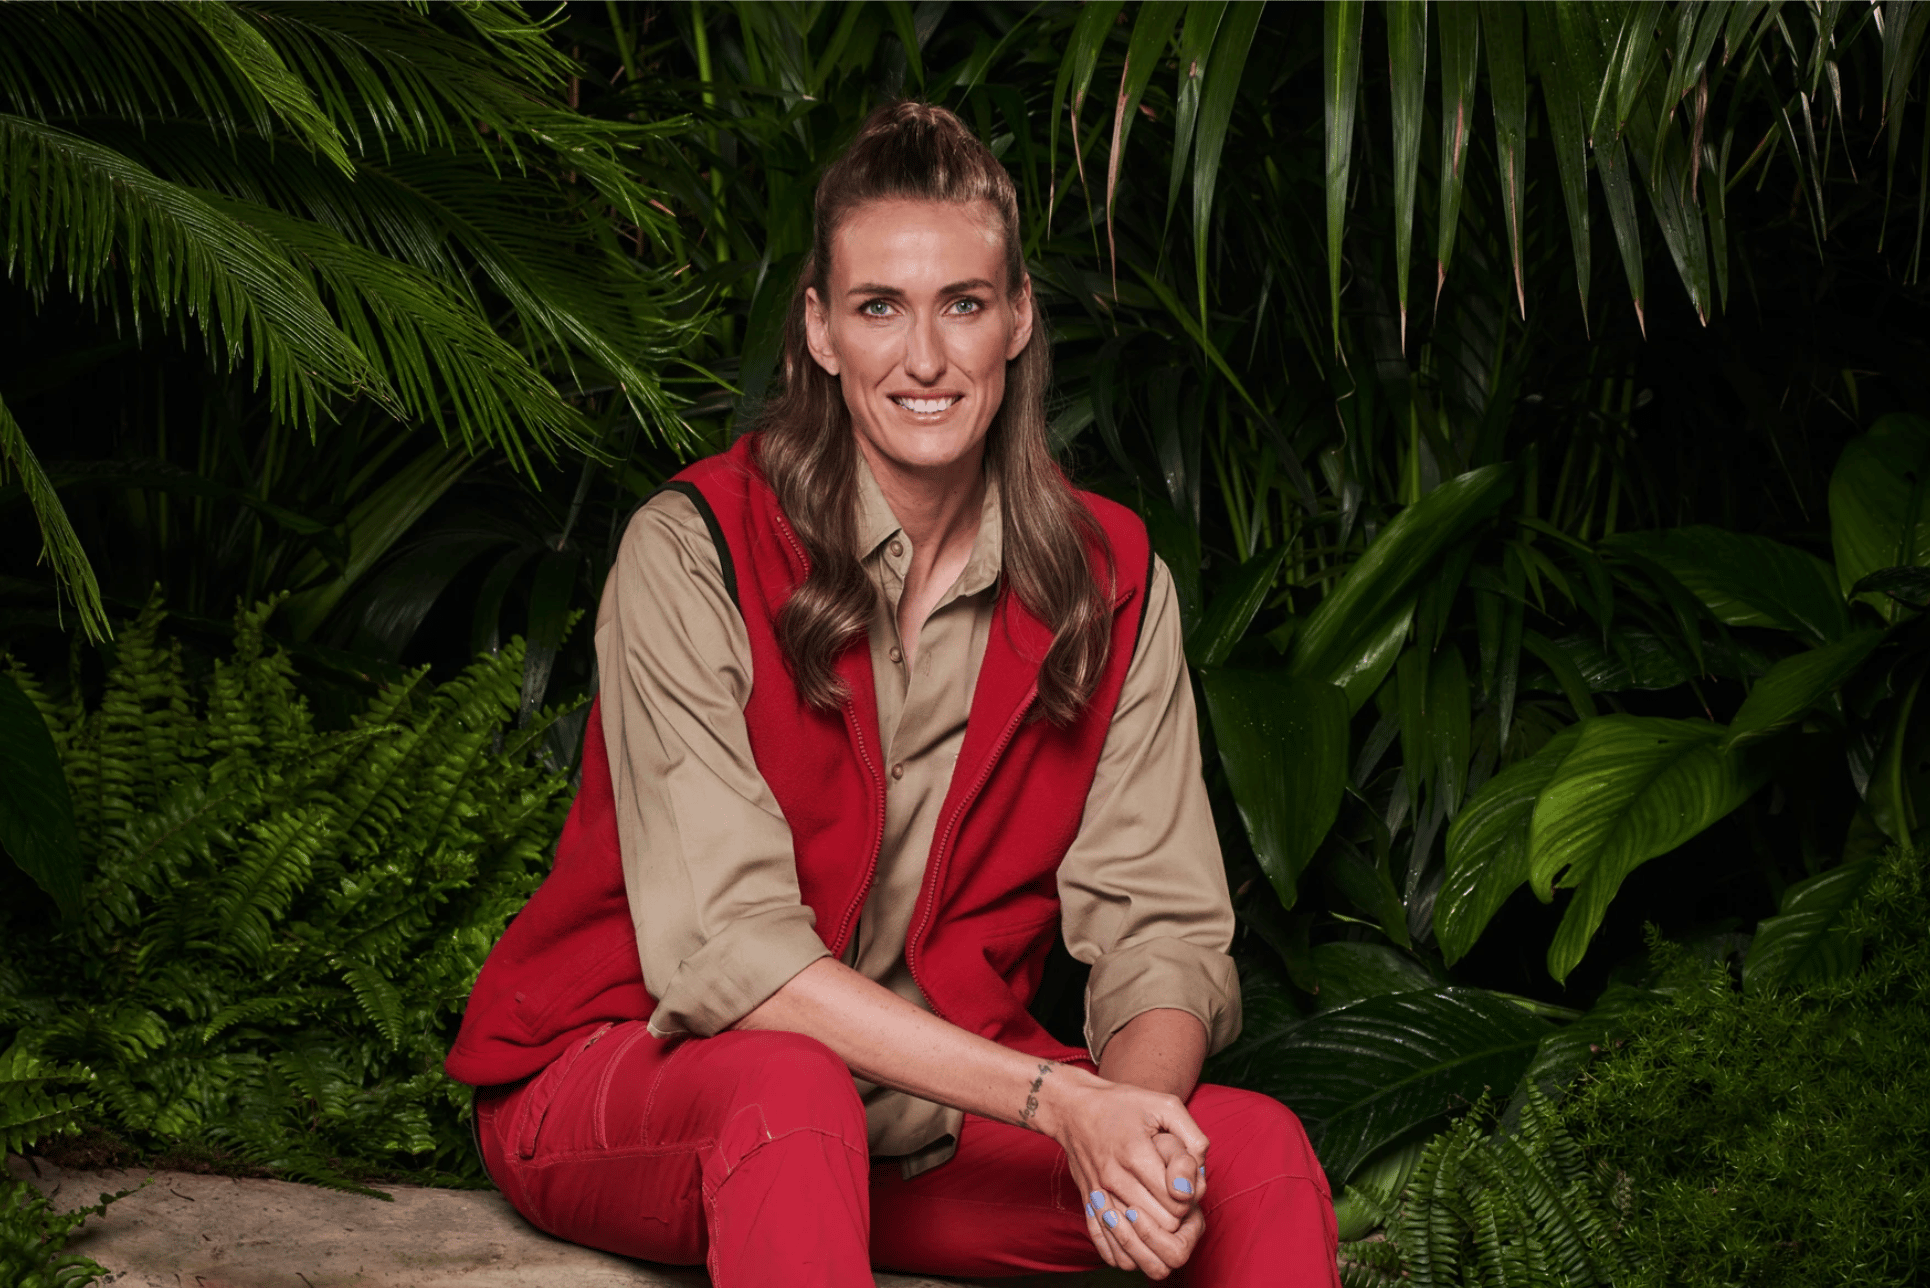 A promotional photo of England Lioness Jill Scott sitting in a jungle setting for the series I'm a Celebrity, Get Me Outta Here